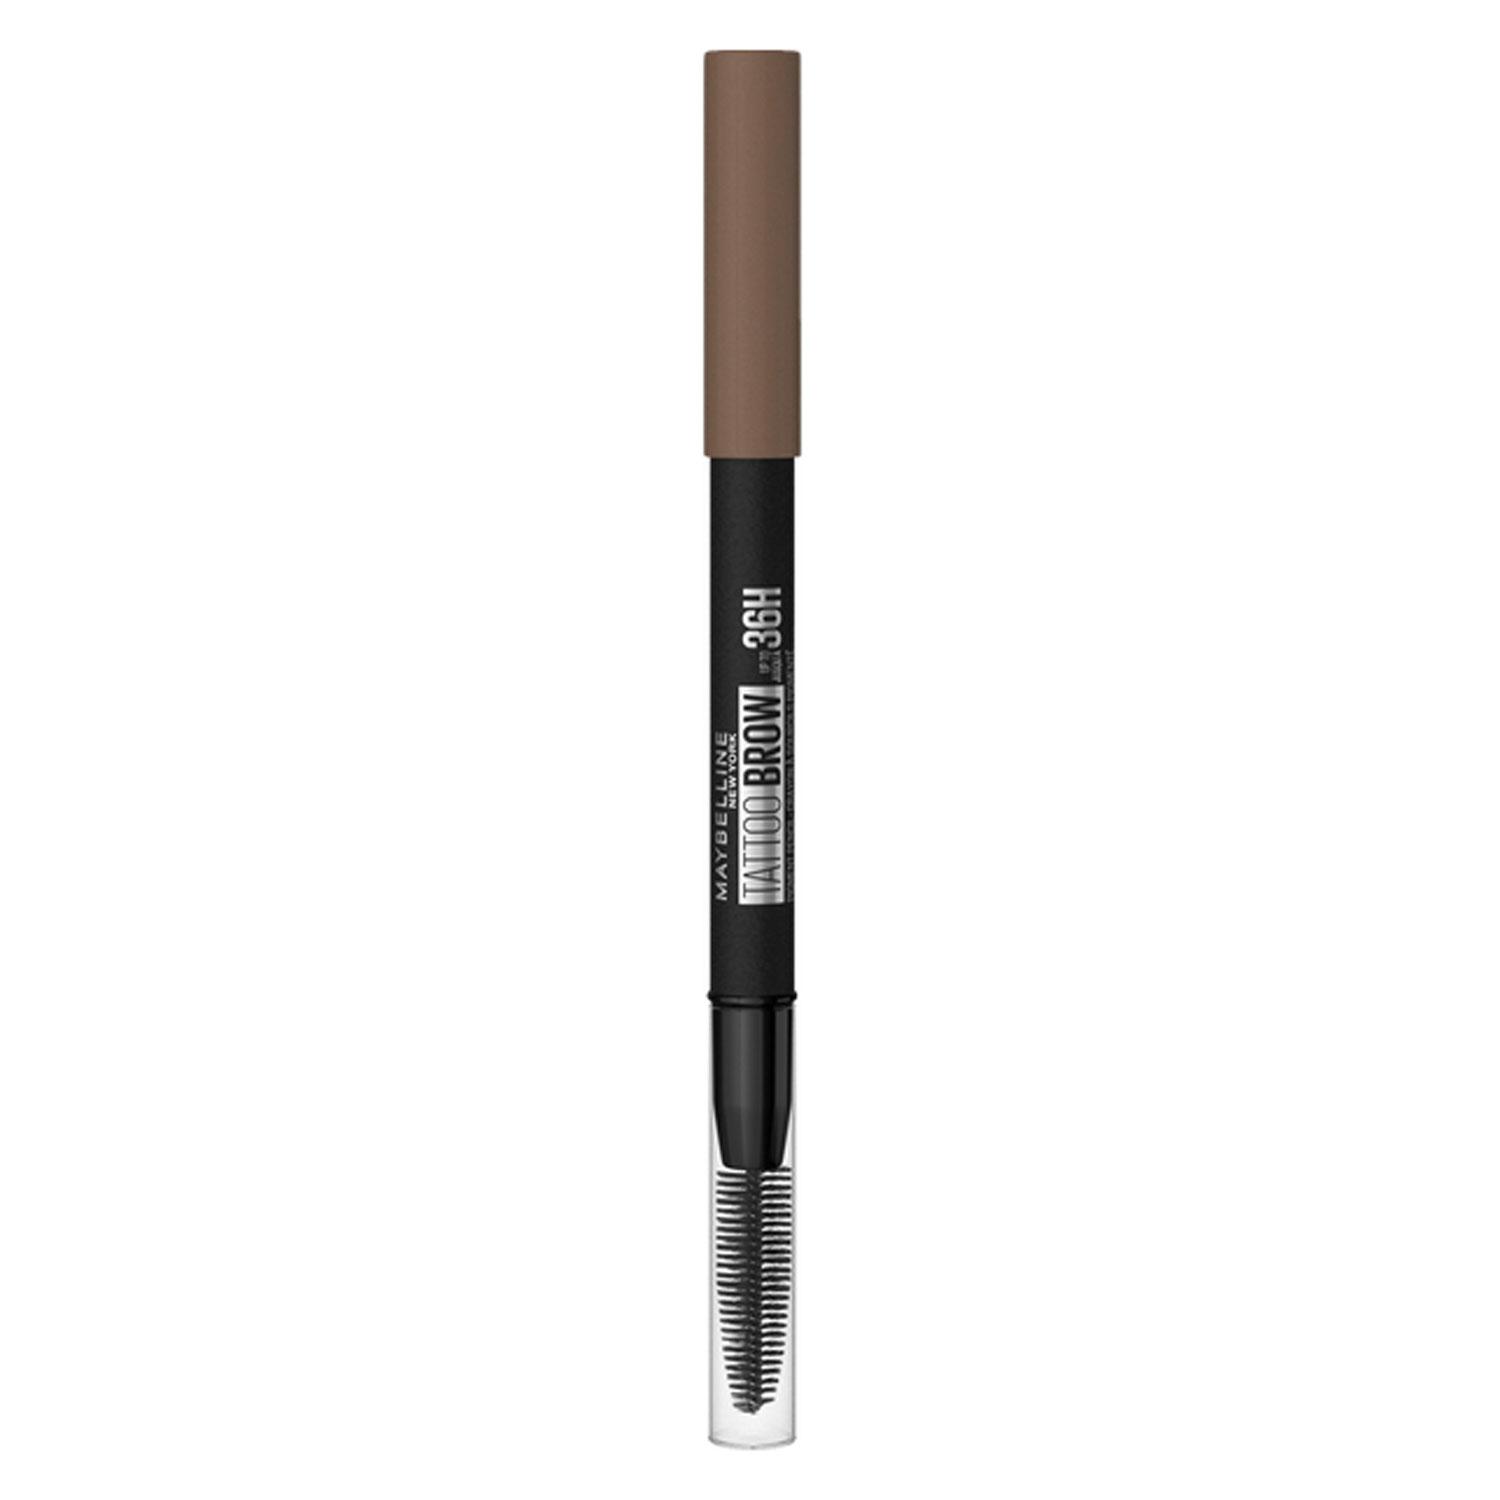 Maybelline NY Brows - Tattoo Brow 36H Augenbrauenstift Nr. 6 Ash Brown